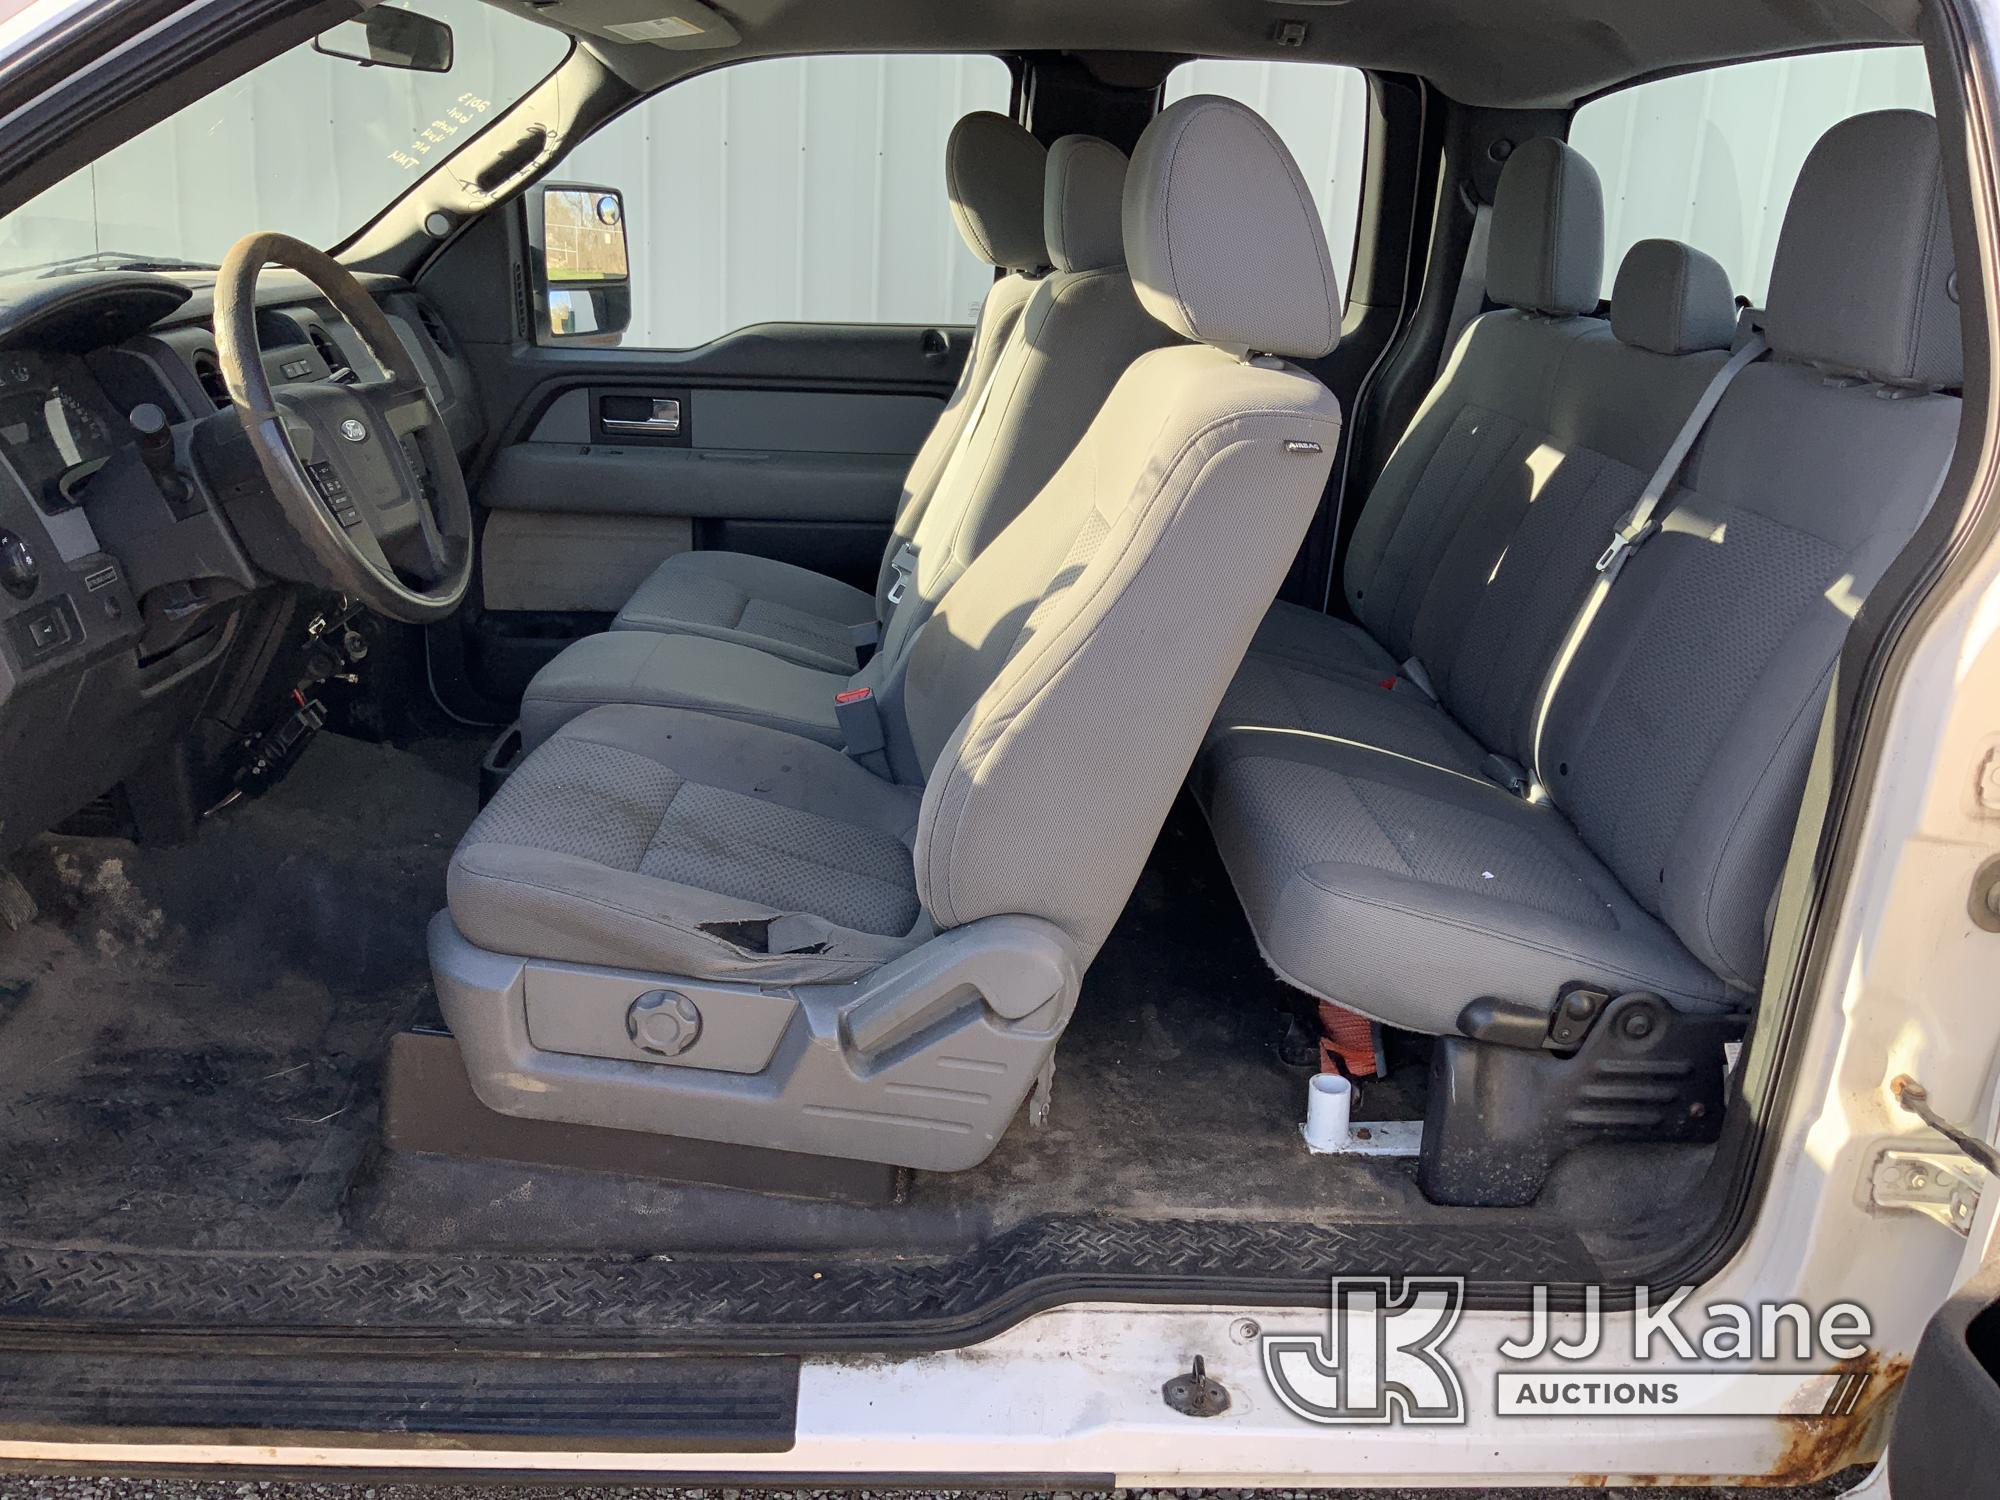 (Fort Wayne, IN) 2013 Ford F150 4x4 Extended-Cab Pickup Truck Not Running, Condition Unknown, No Cra